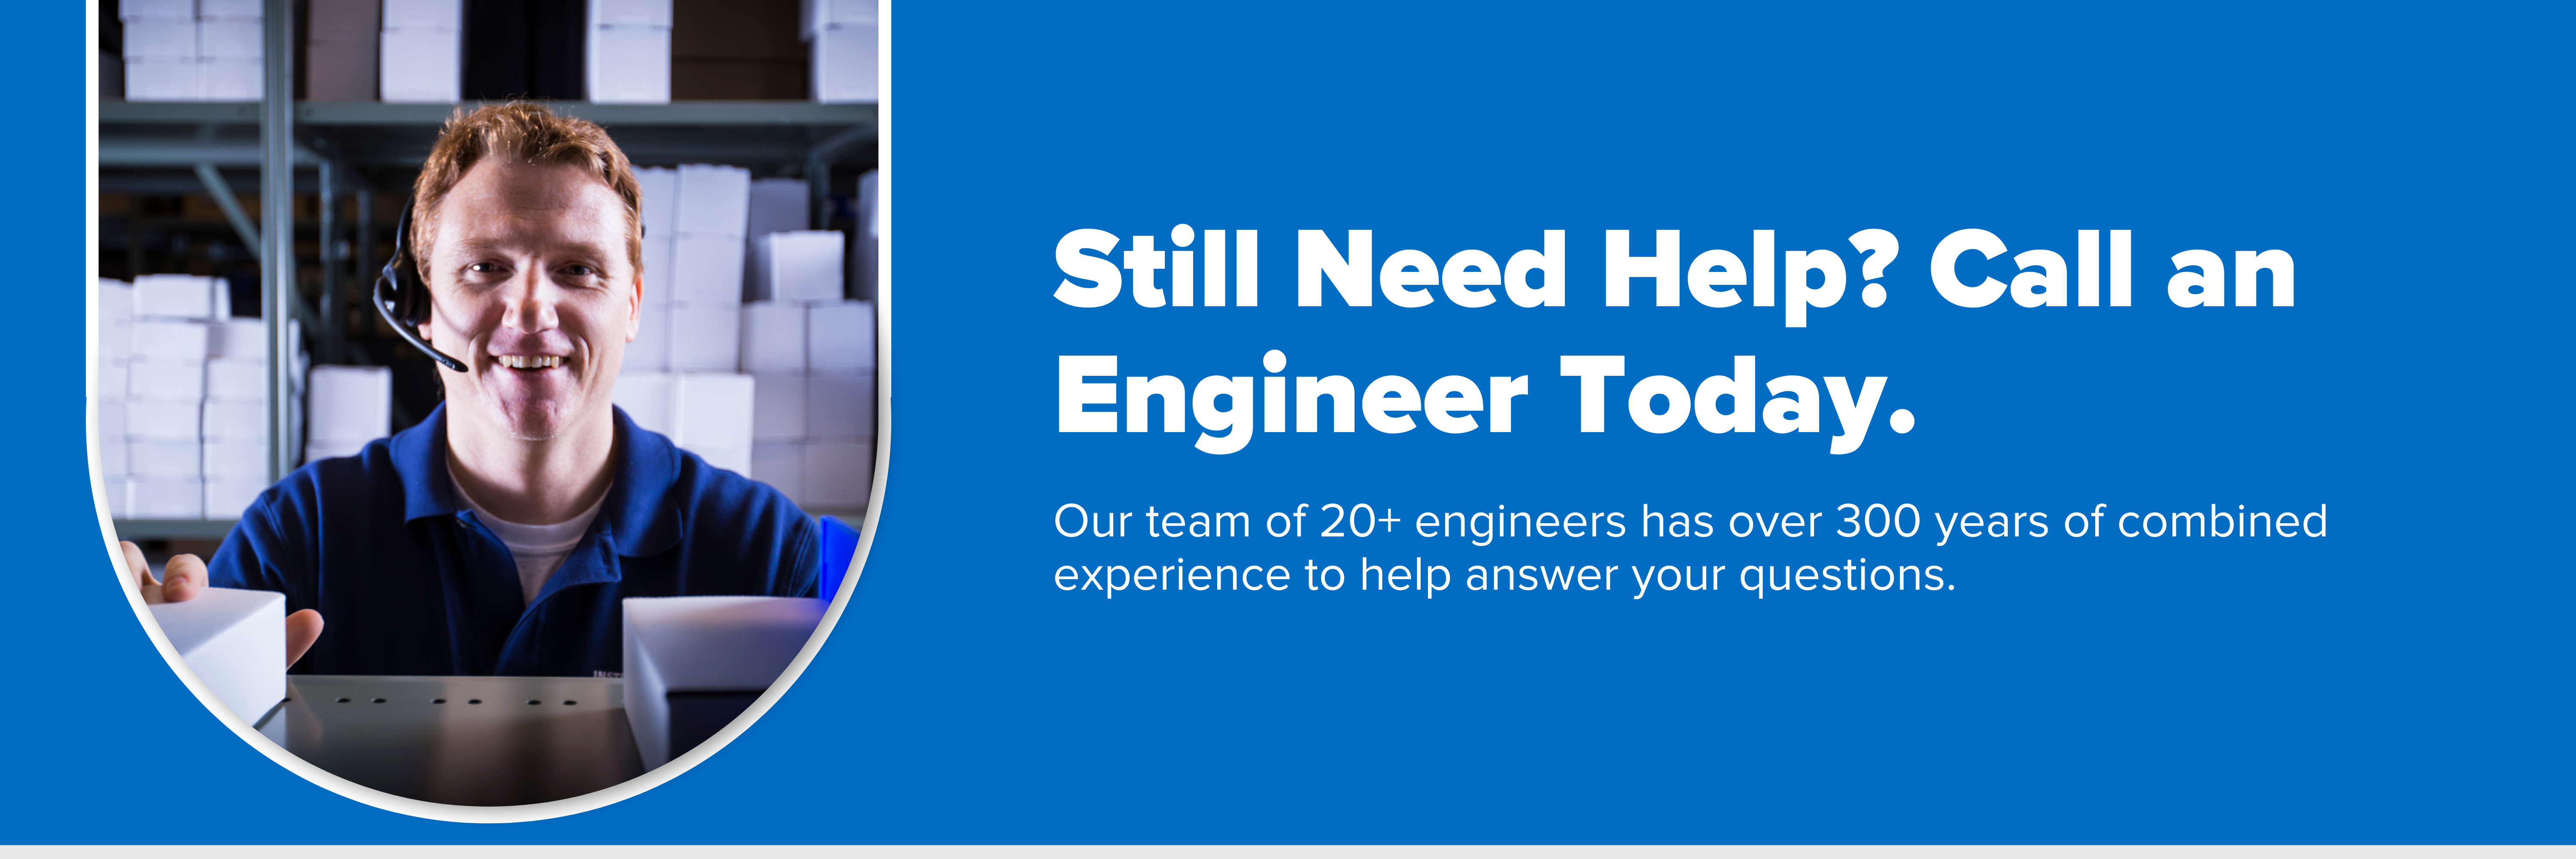 Header image with text "Still Need Help? Call an Engineer Today."